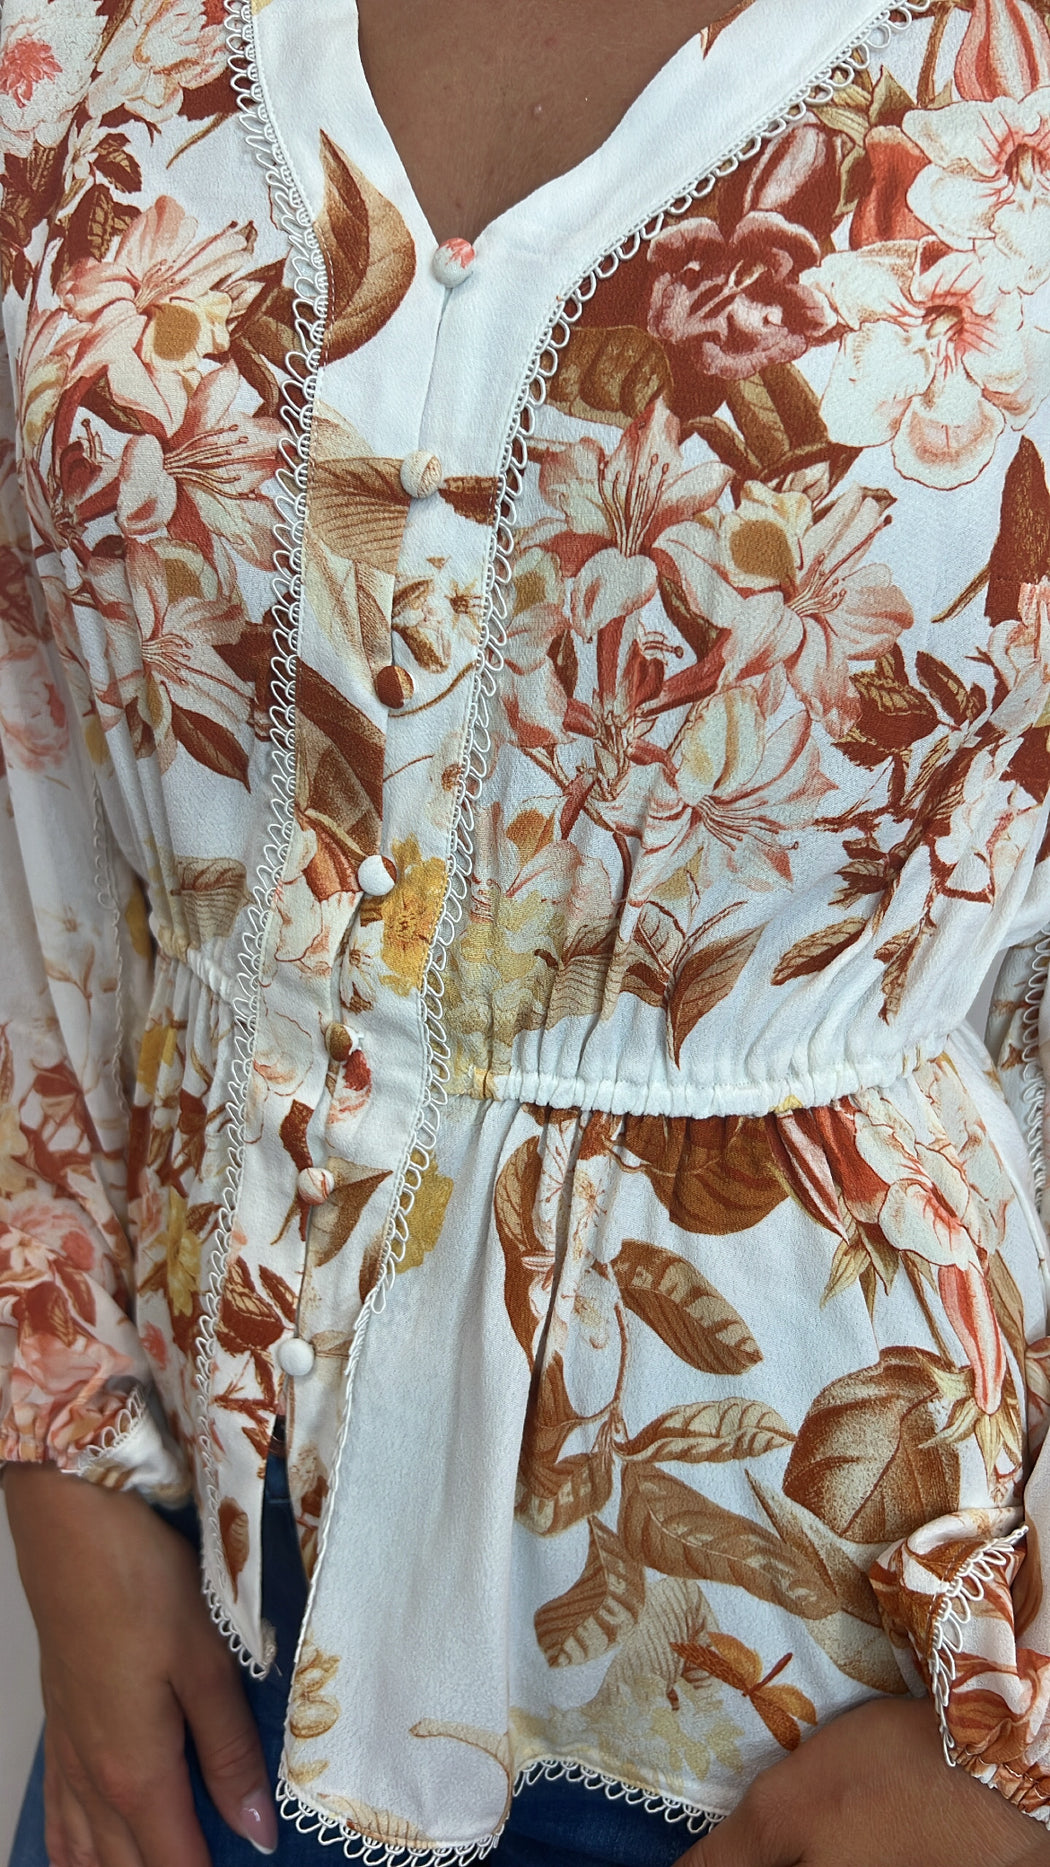 Guess hera floral blouse